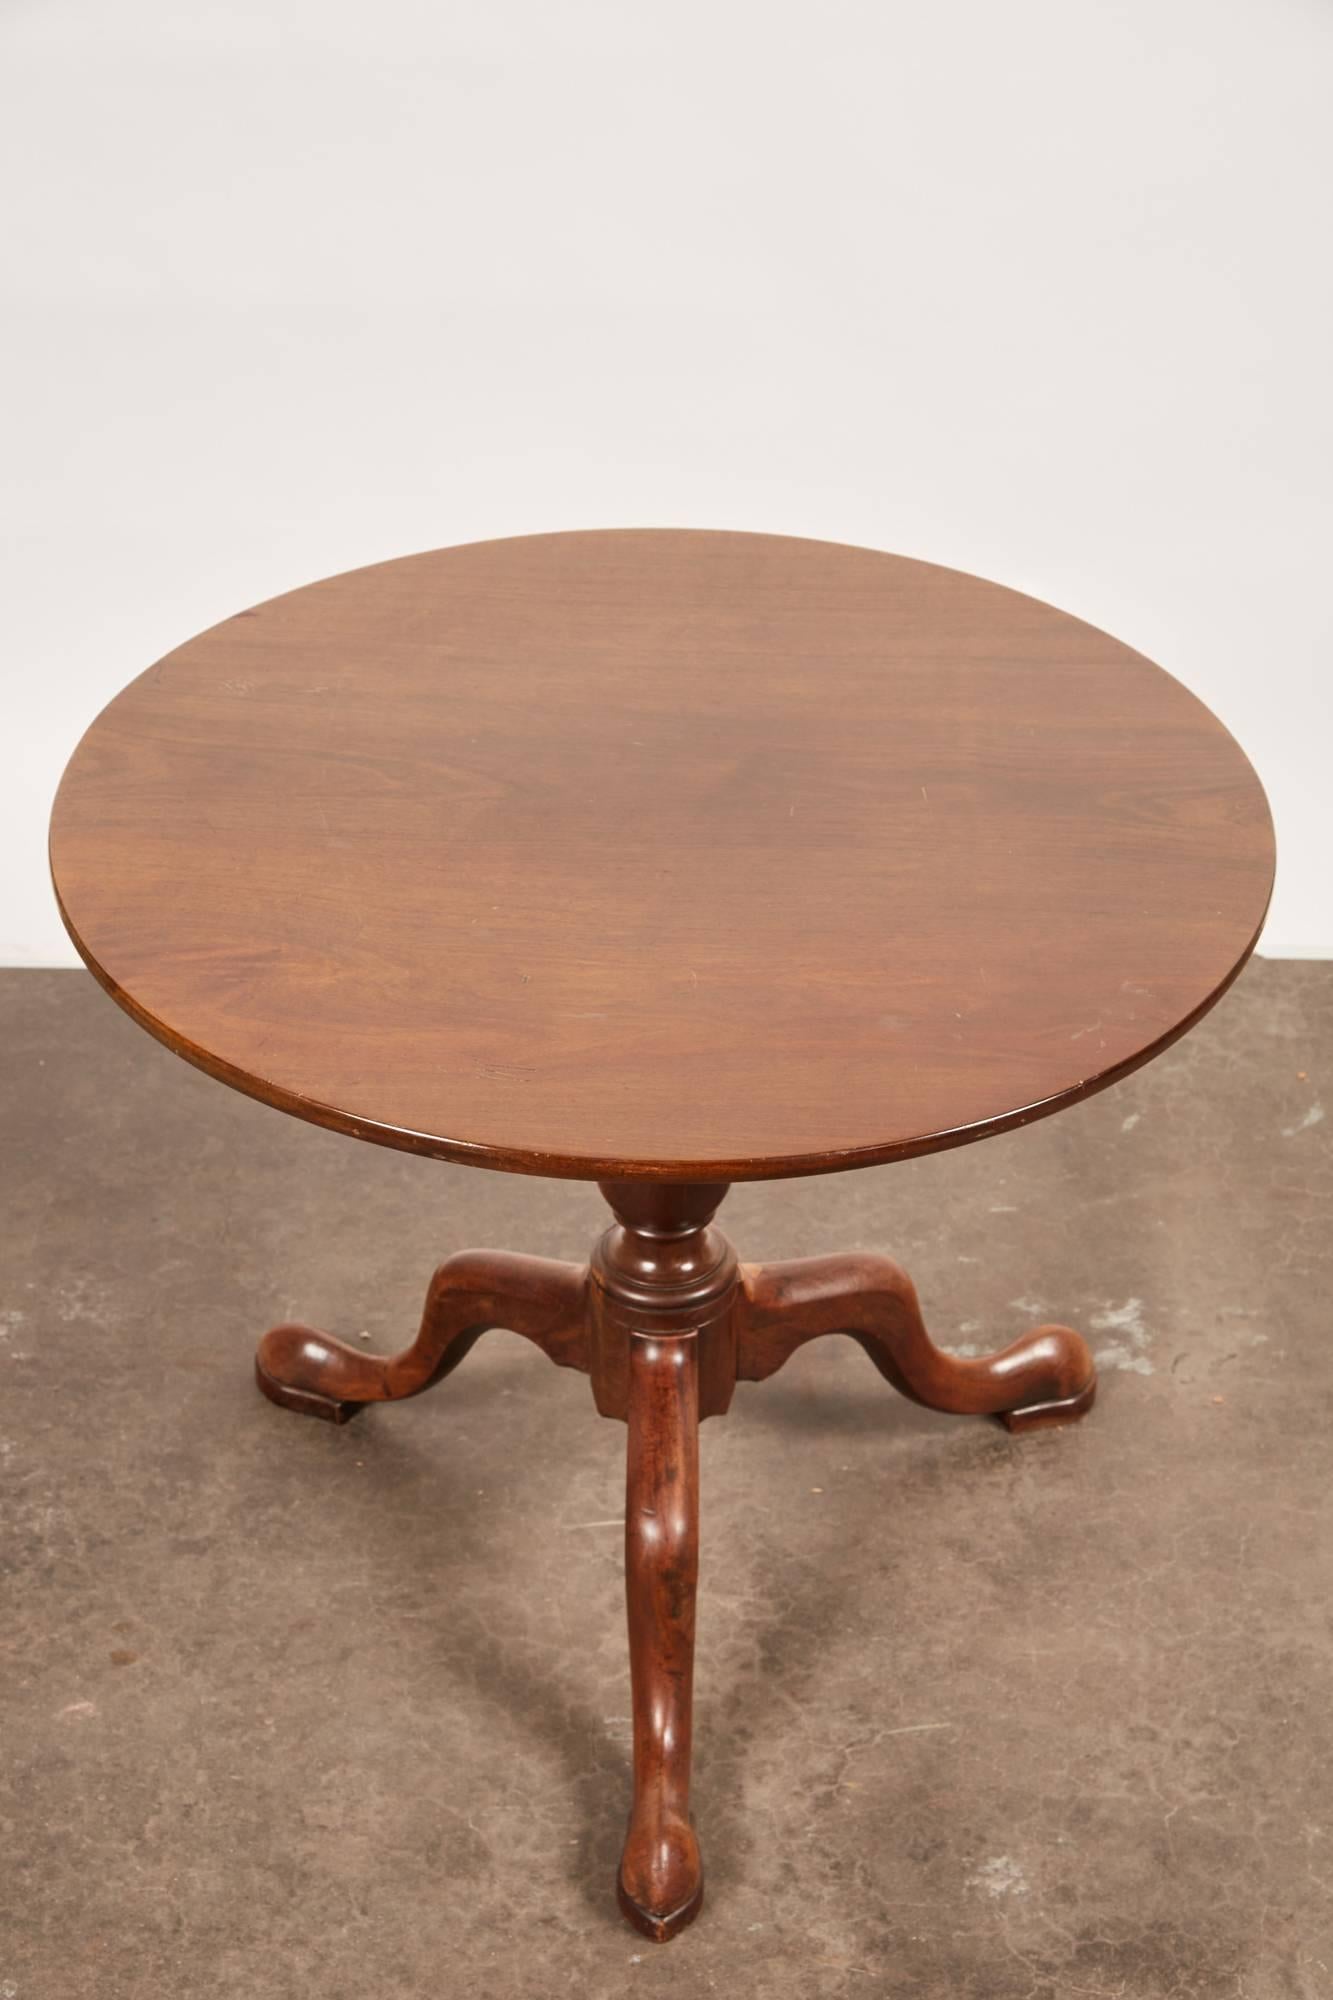 19th Century Queen Anne English Mahogany Pedestal Table In Good Condition For Sale In Pasadena, CA